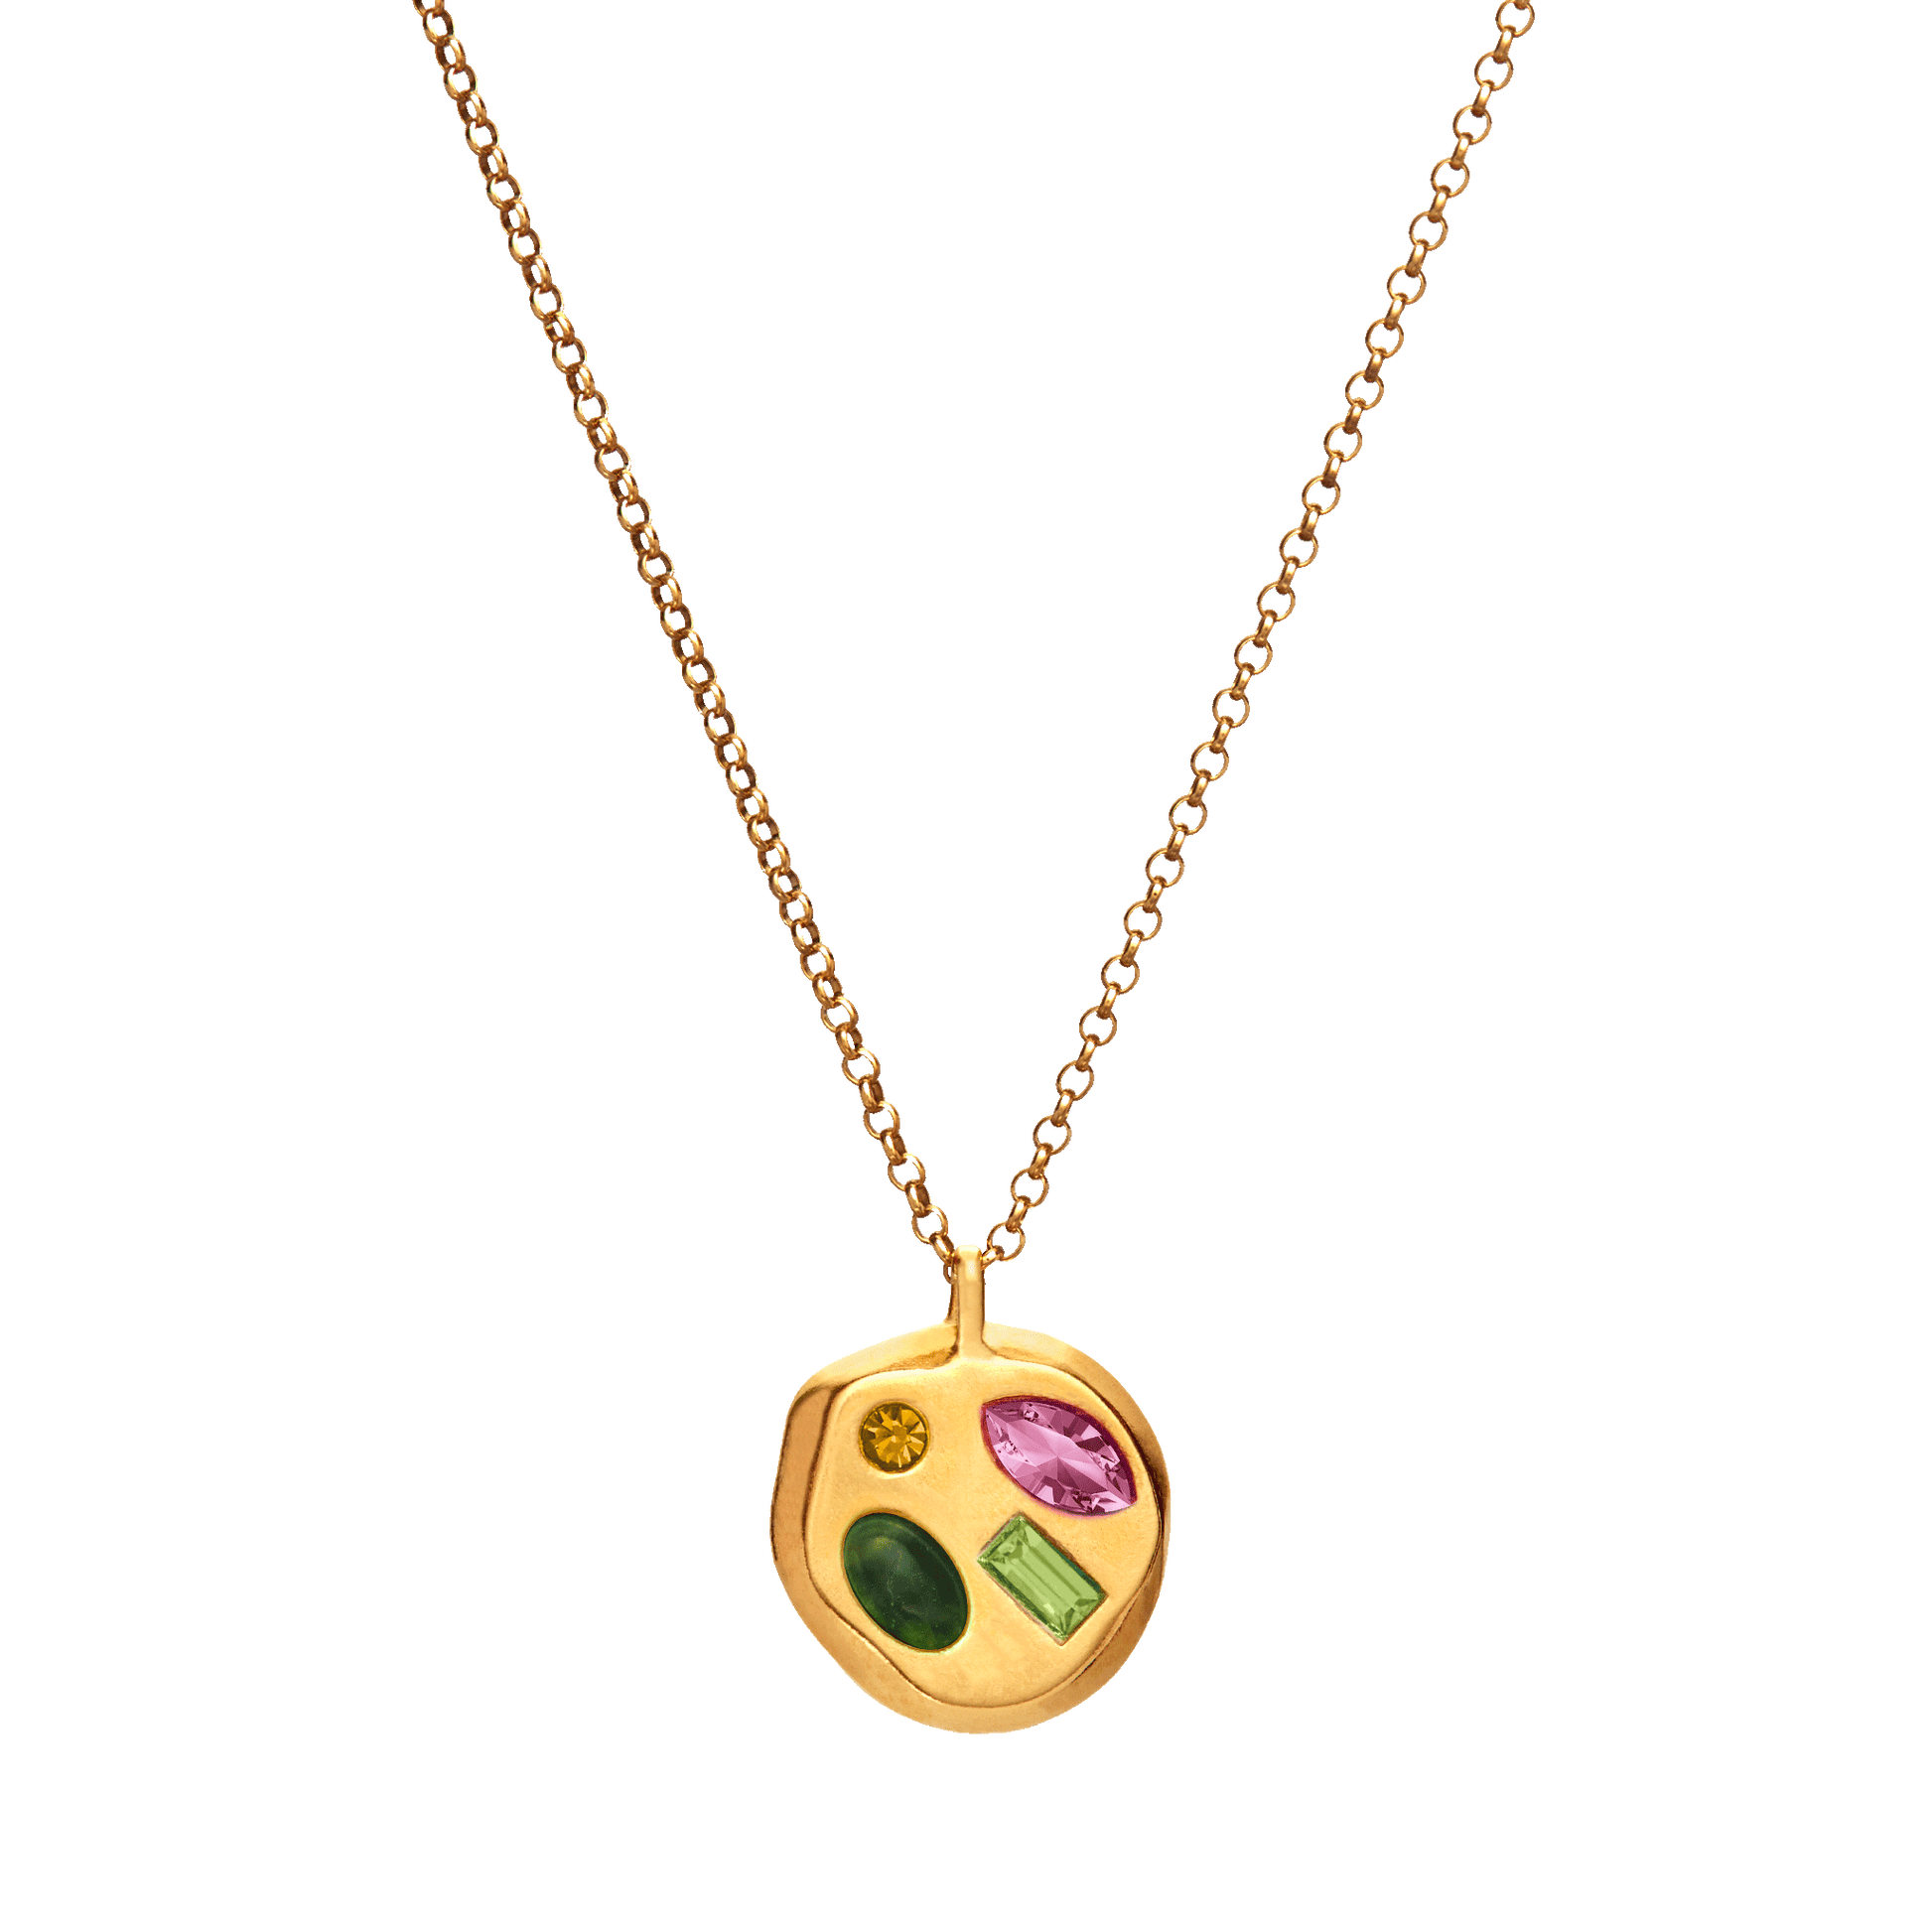 The October Eighth Pendant